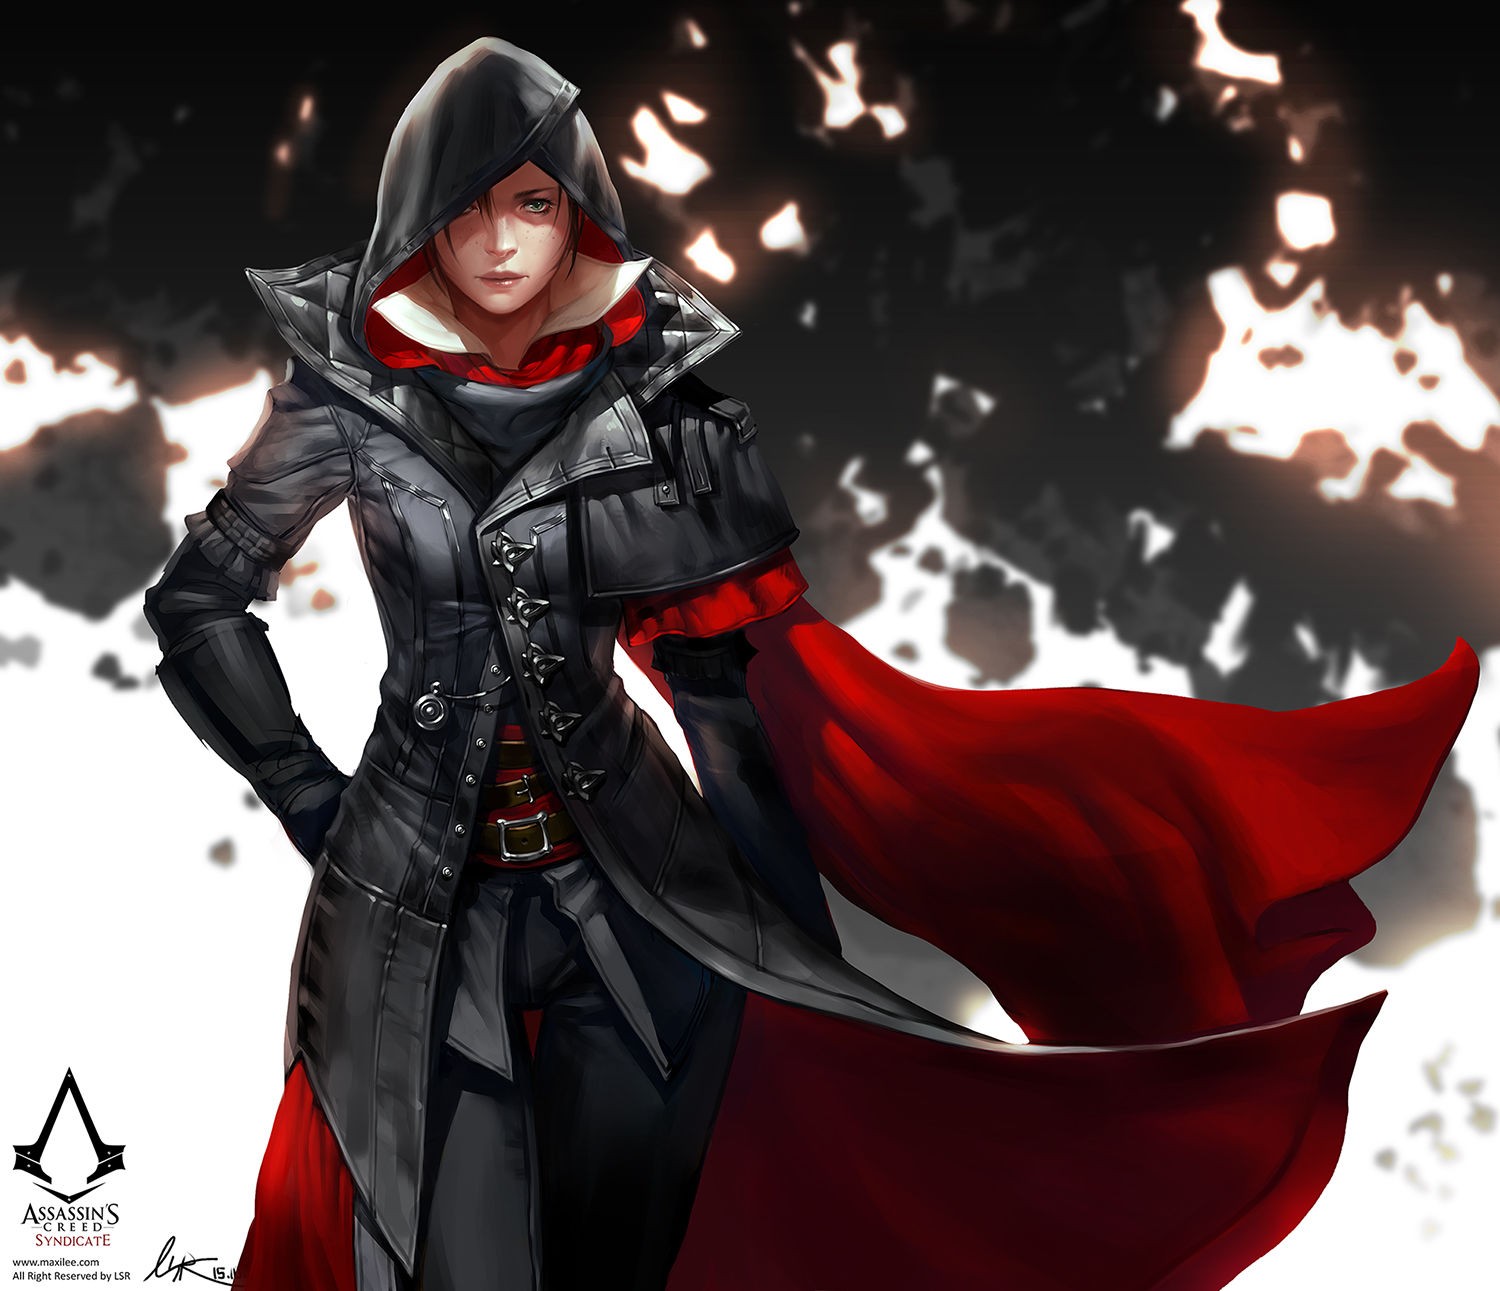 General 1500x1291 Assassin's Creed Evie Frye video game girls video game art Assassin's Creed Syndicate video game characters hoods women video games PC gaming